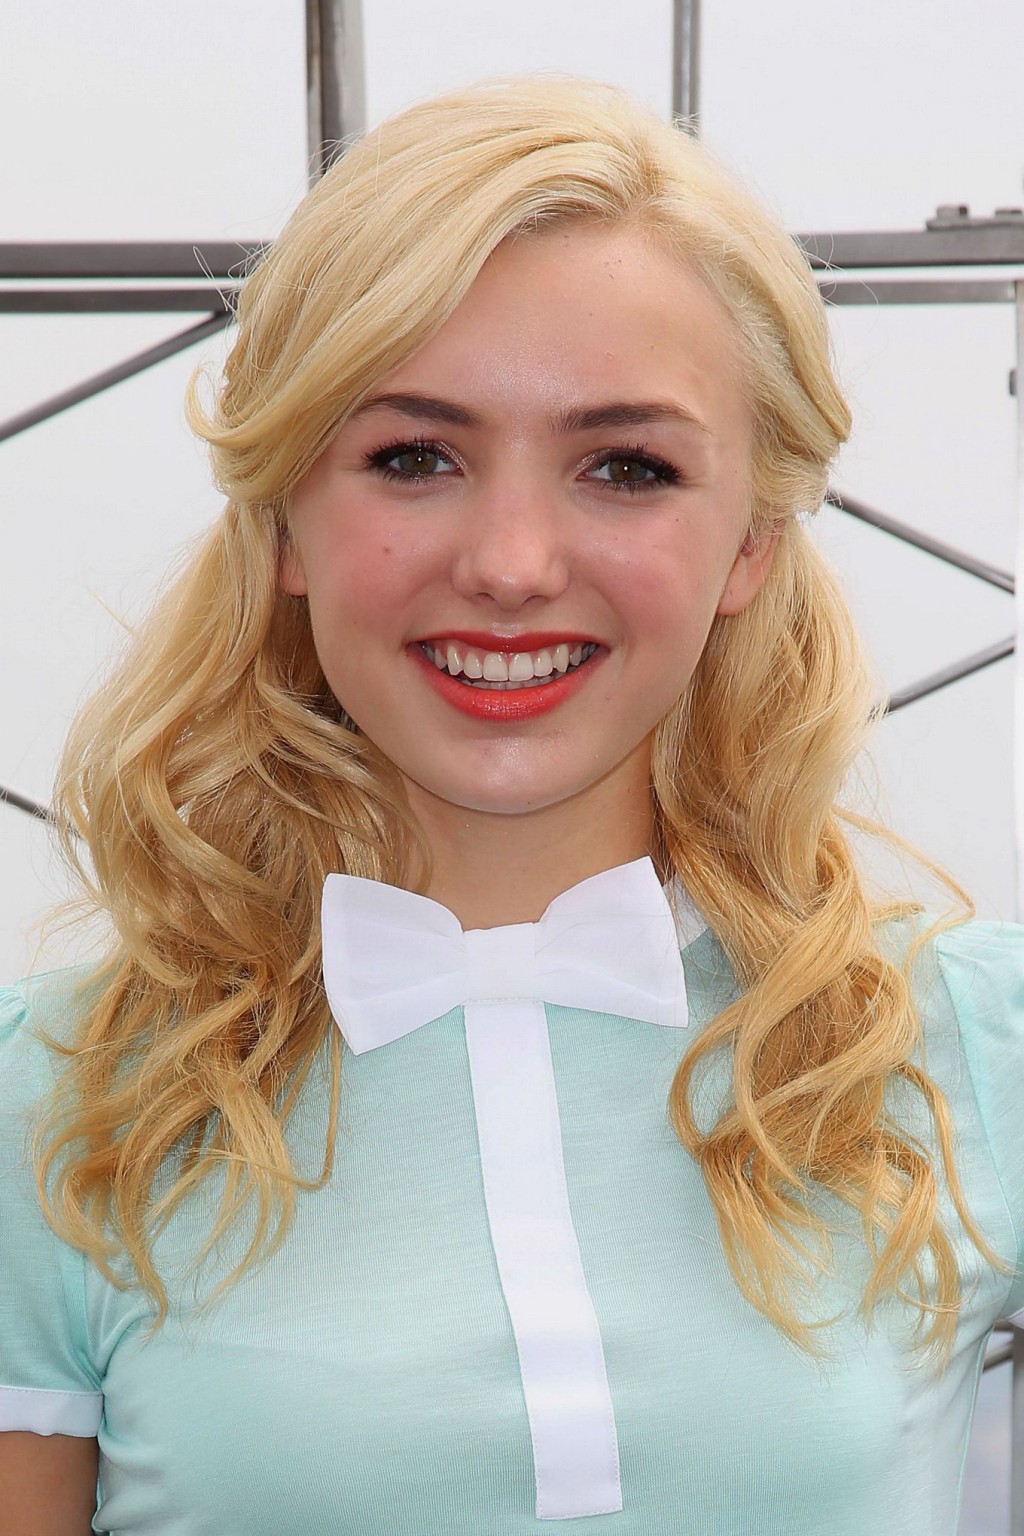 Peyton List leggy wearing tiny hot uniform at the Empire State Building Photocal #75197198